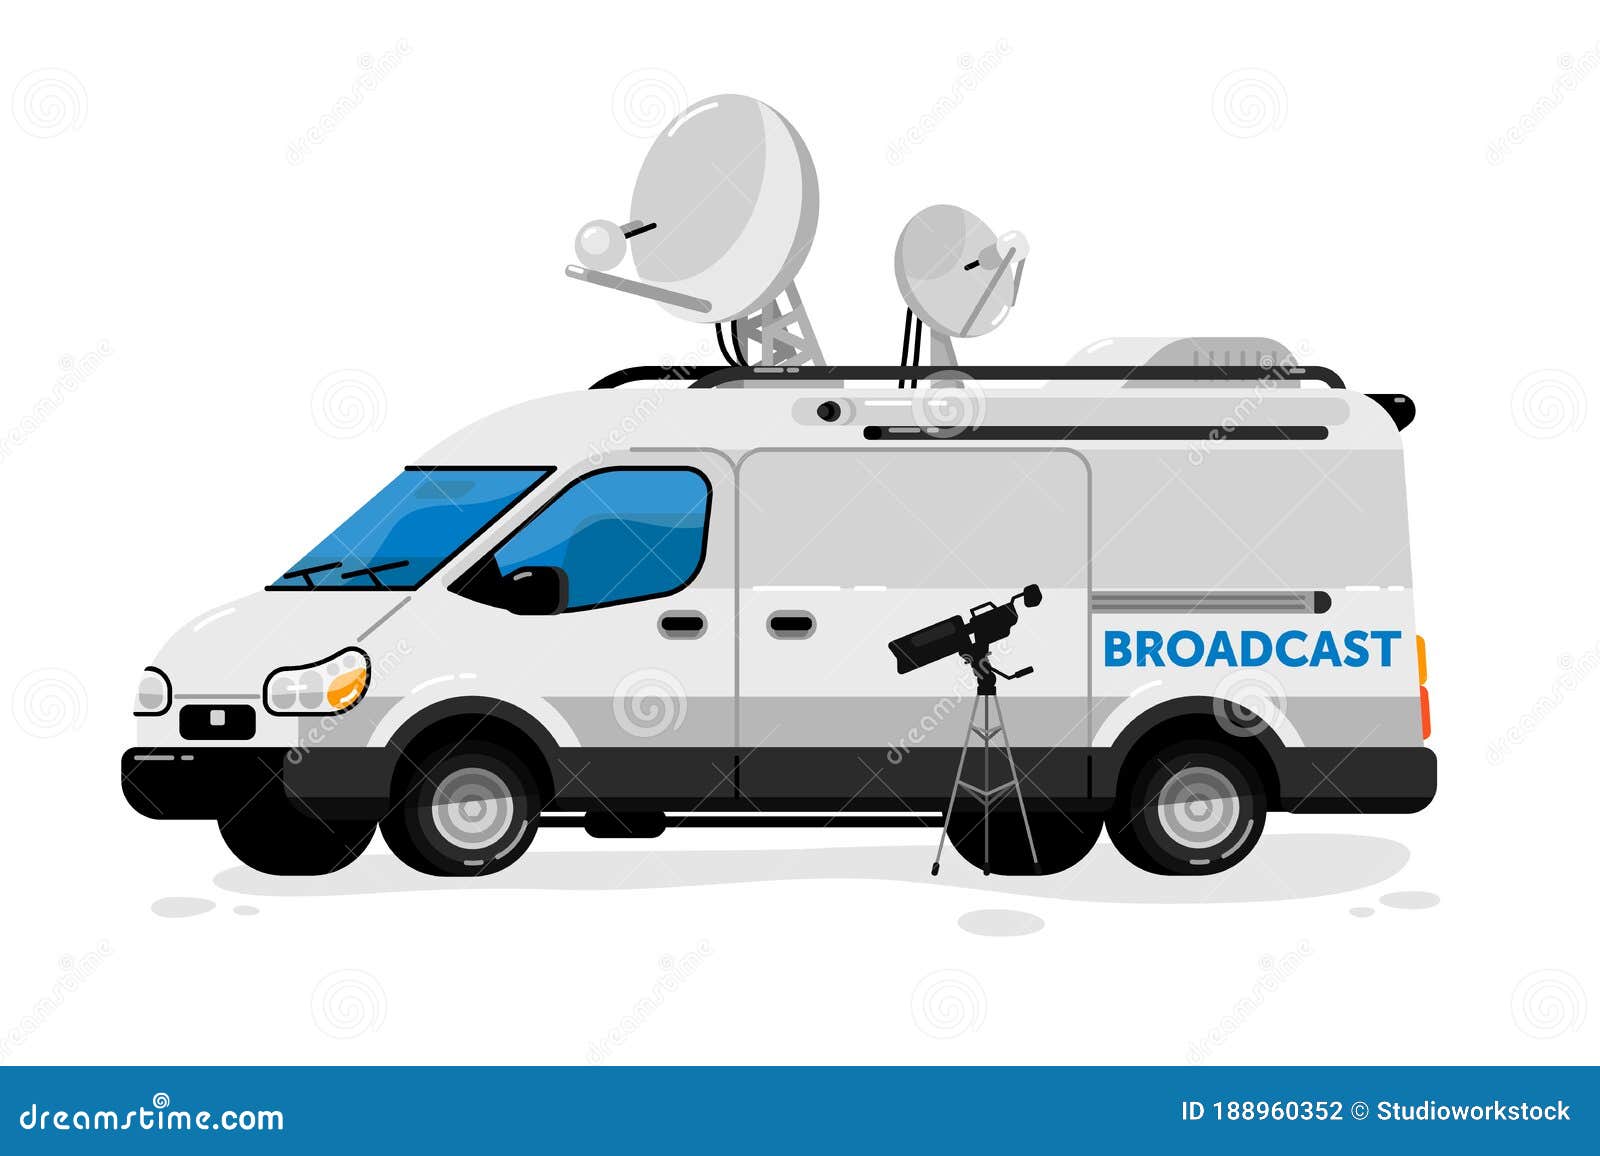 Broadcasting Isolated Media Stock Vector - Illustration of breaking, channel: 188960352